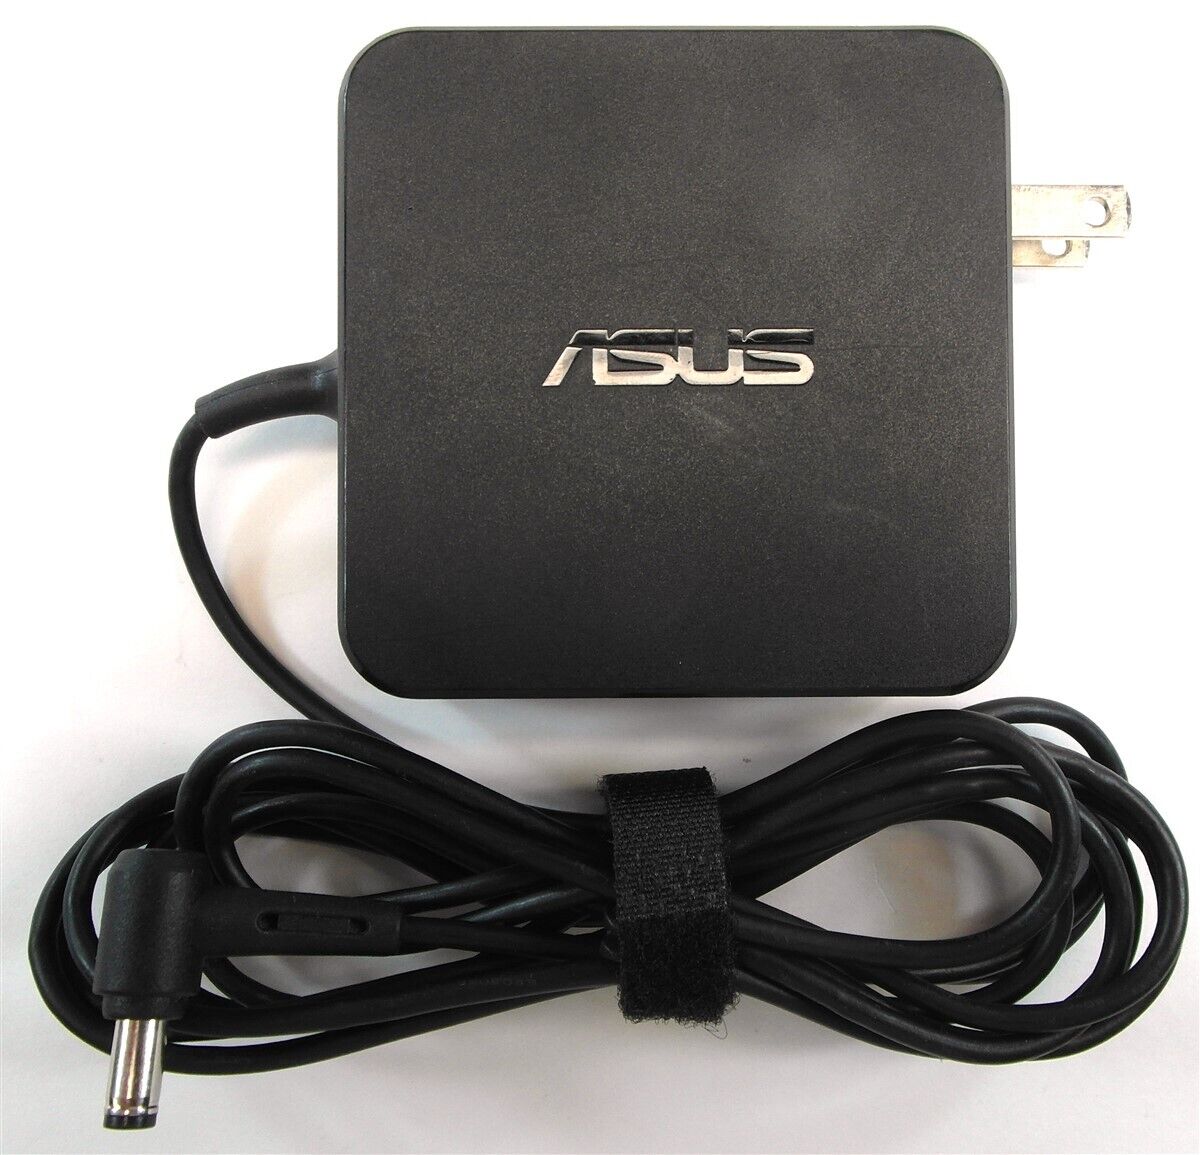 Genuine Asus Laptop Charger AC Power Adapter ADP-65DW B 19V 3.42A 65W 5.5mm Tip 